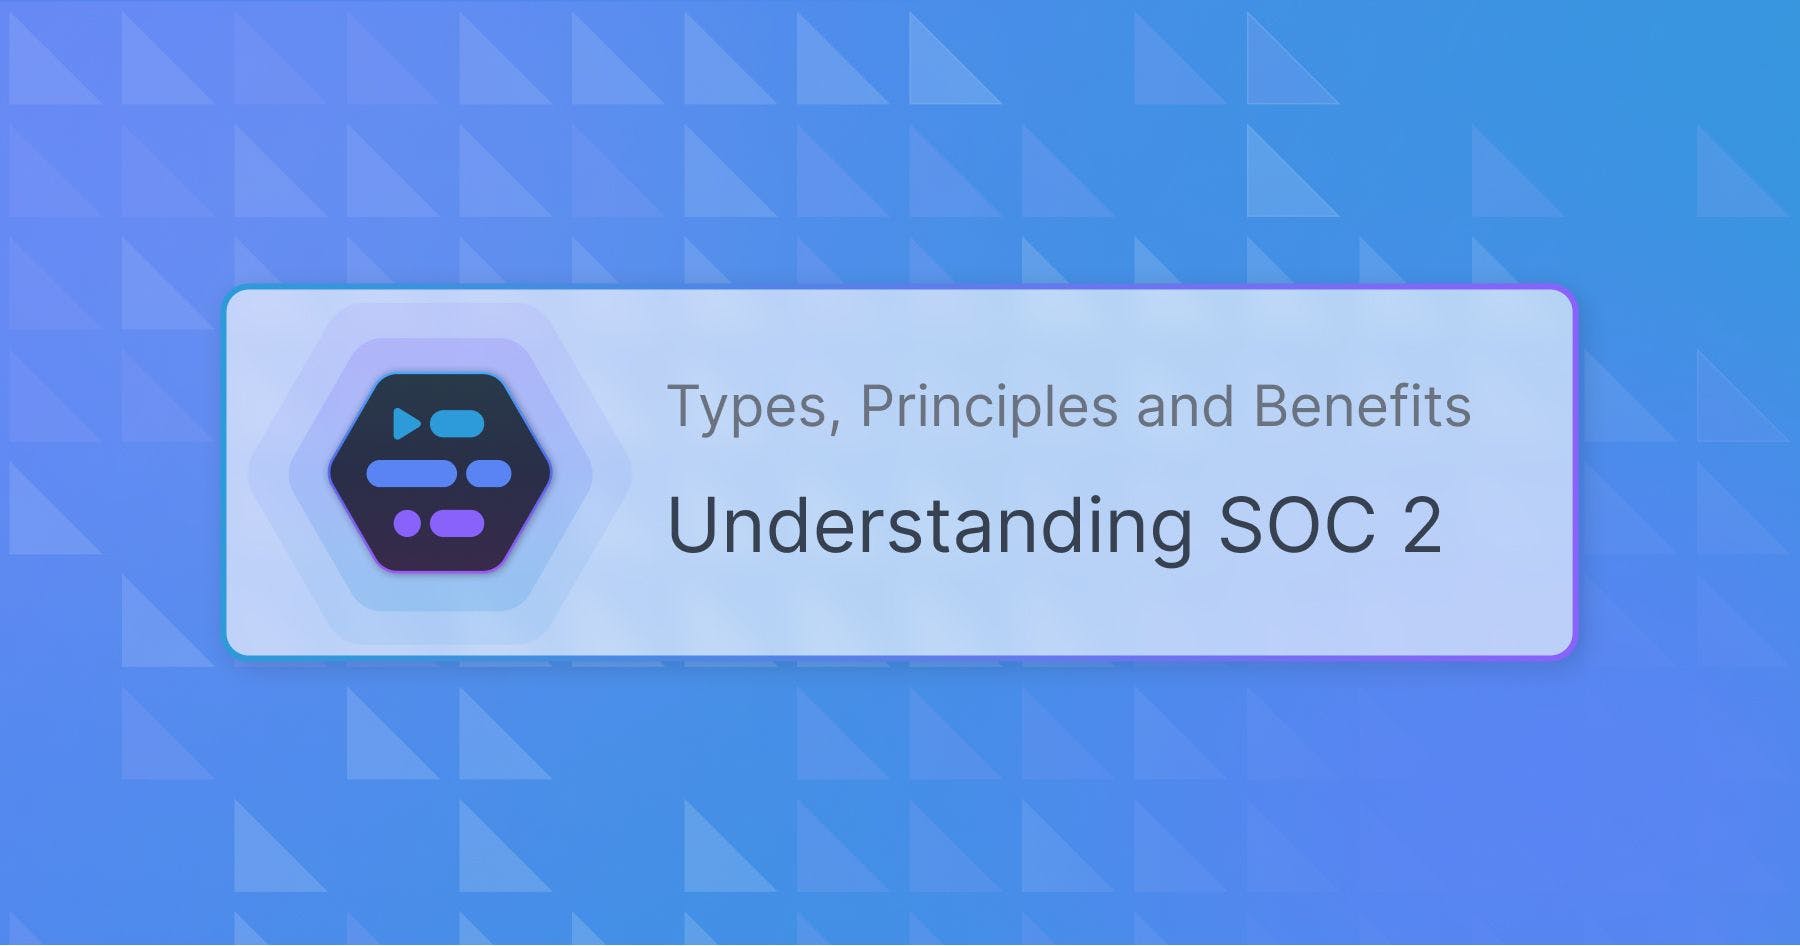 Adaptive Automation Technologies, Inc. - Understanding SOC 2: Types, Principles and Benefits